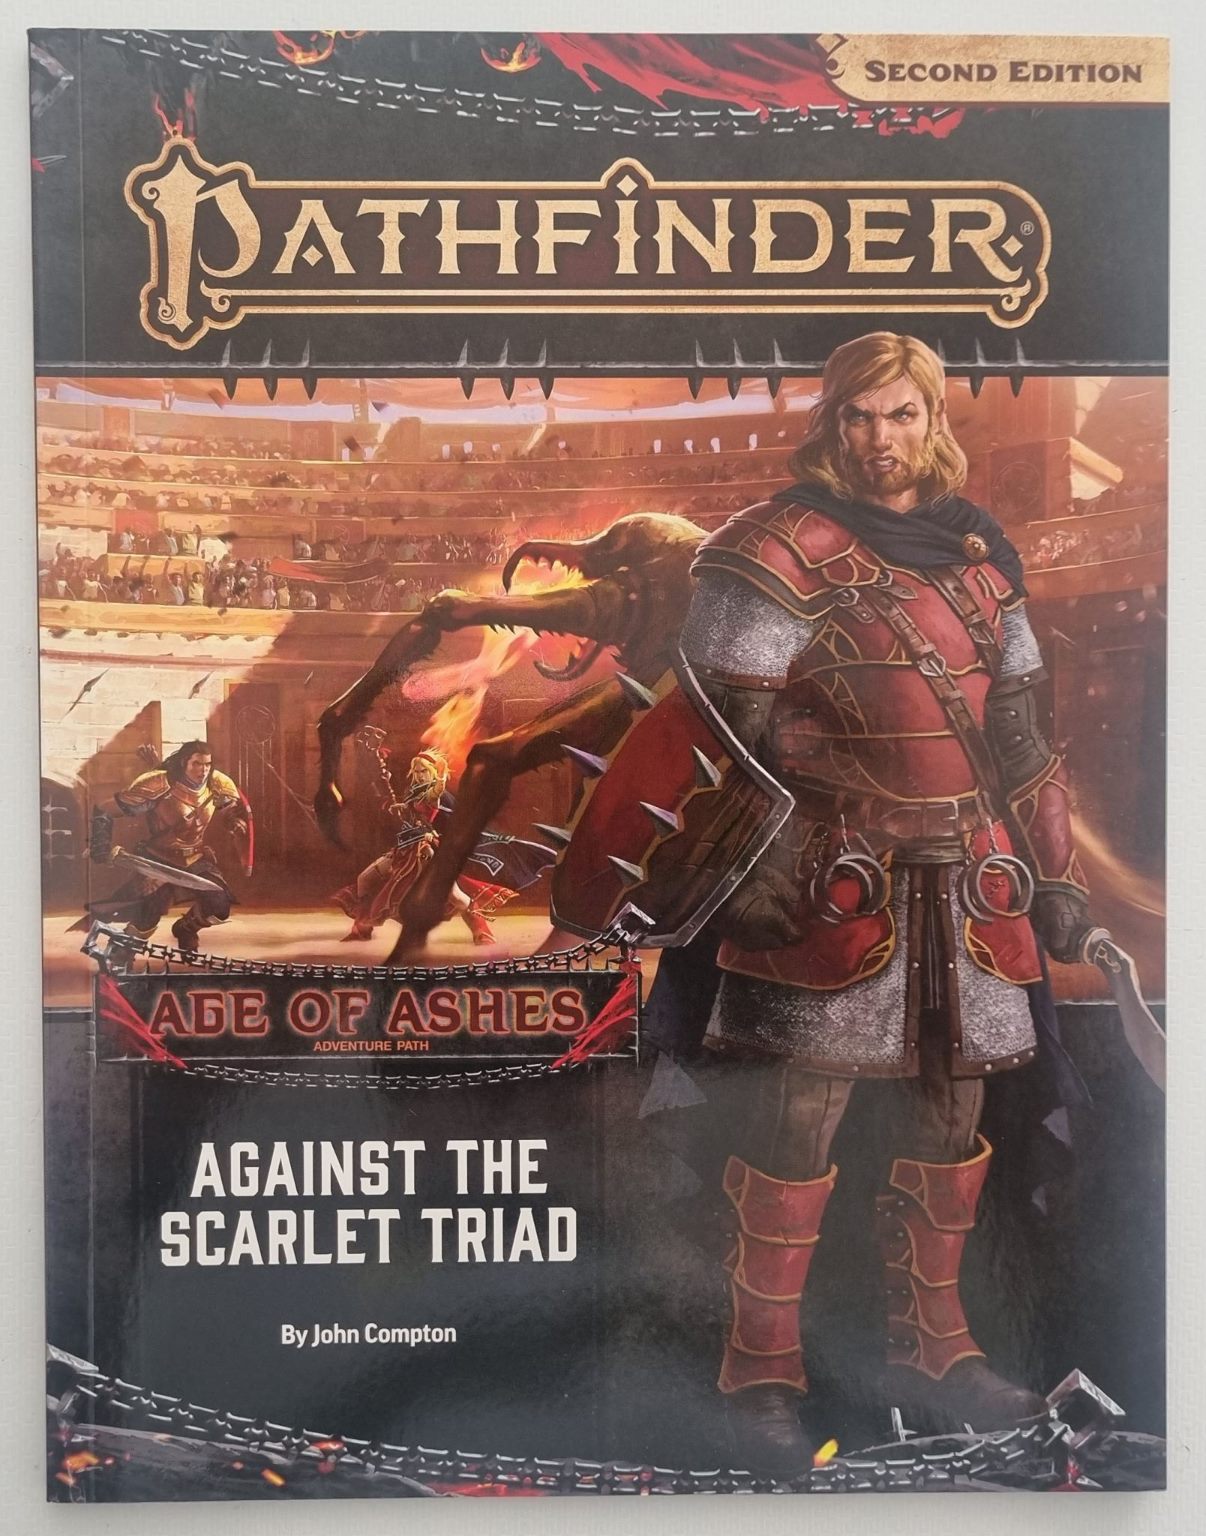 Pathfinder: Age of Ashes: Against the Scarlet Triad - Second Edition (2e)